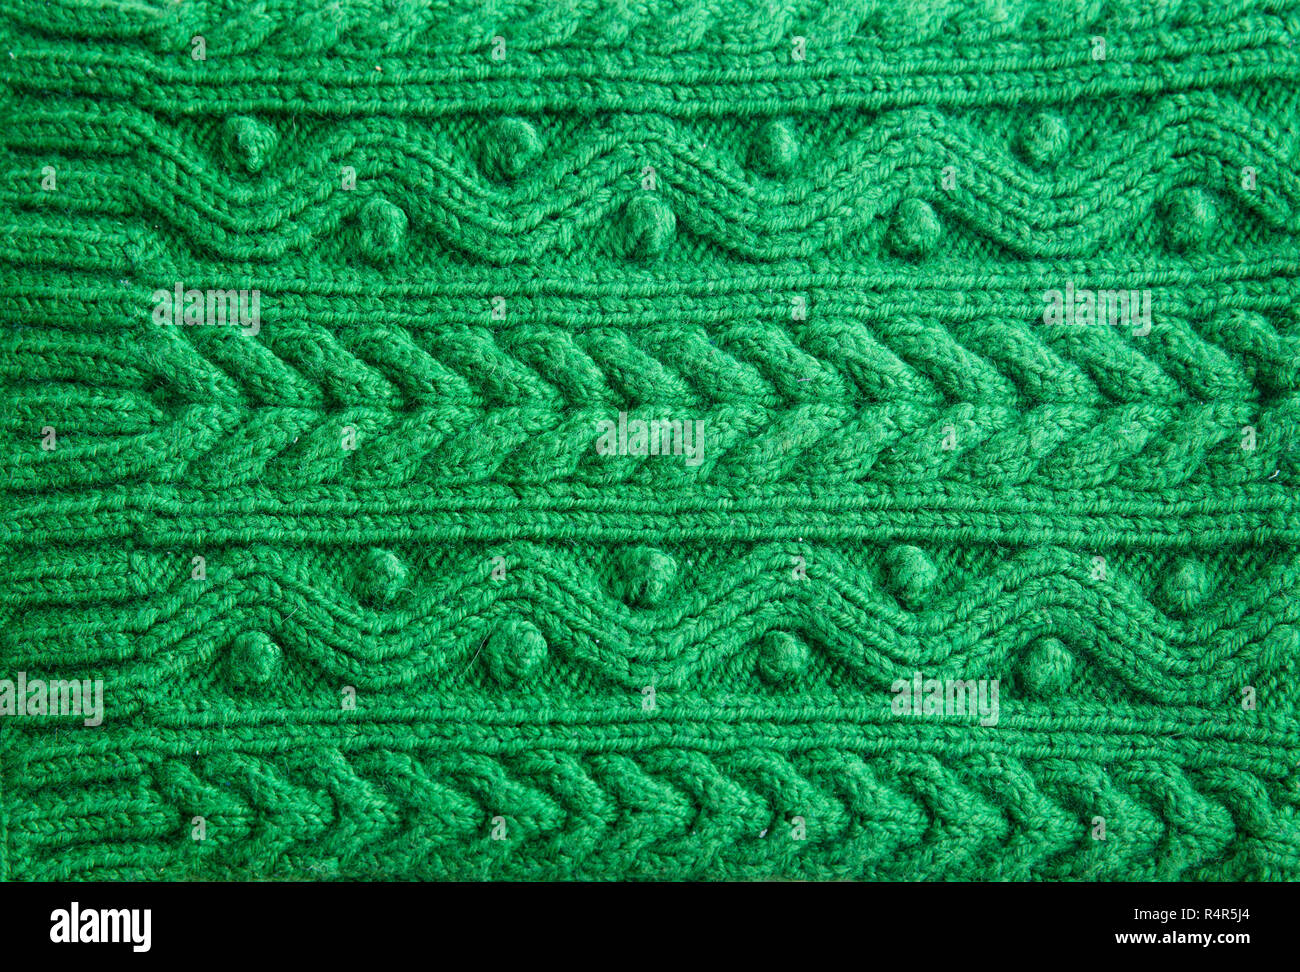 Knitted green pattern wool sweater texture close up Stock Photo - Alamy